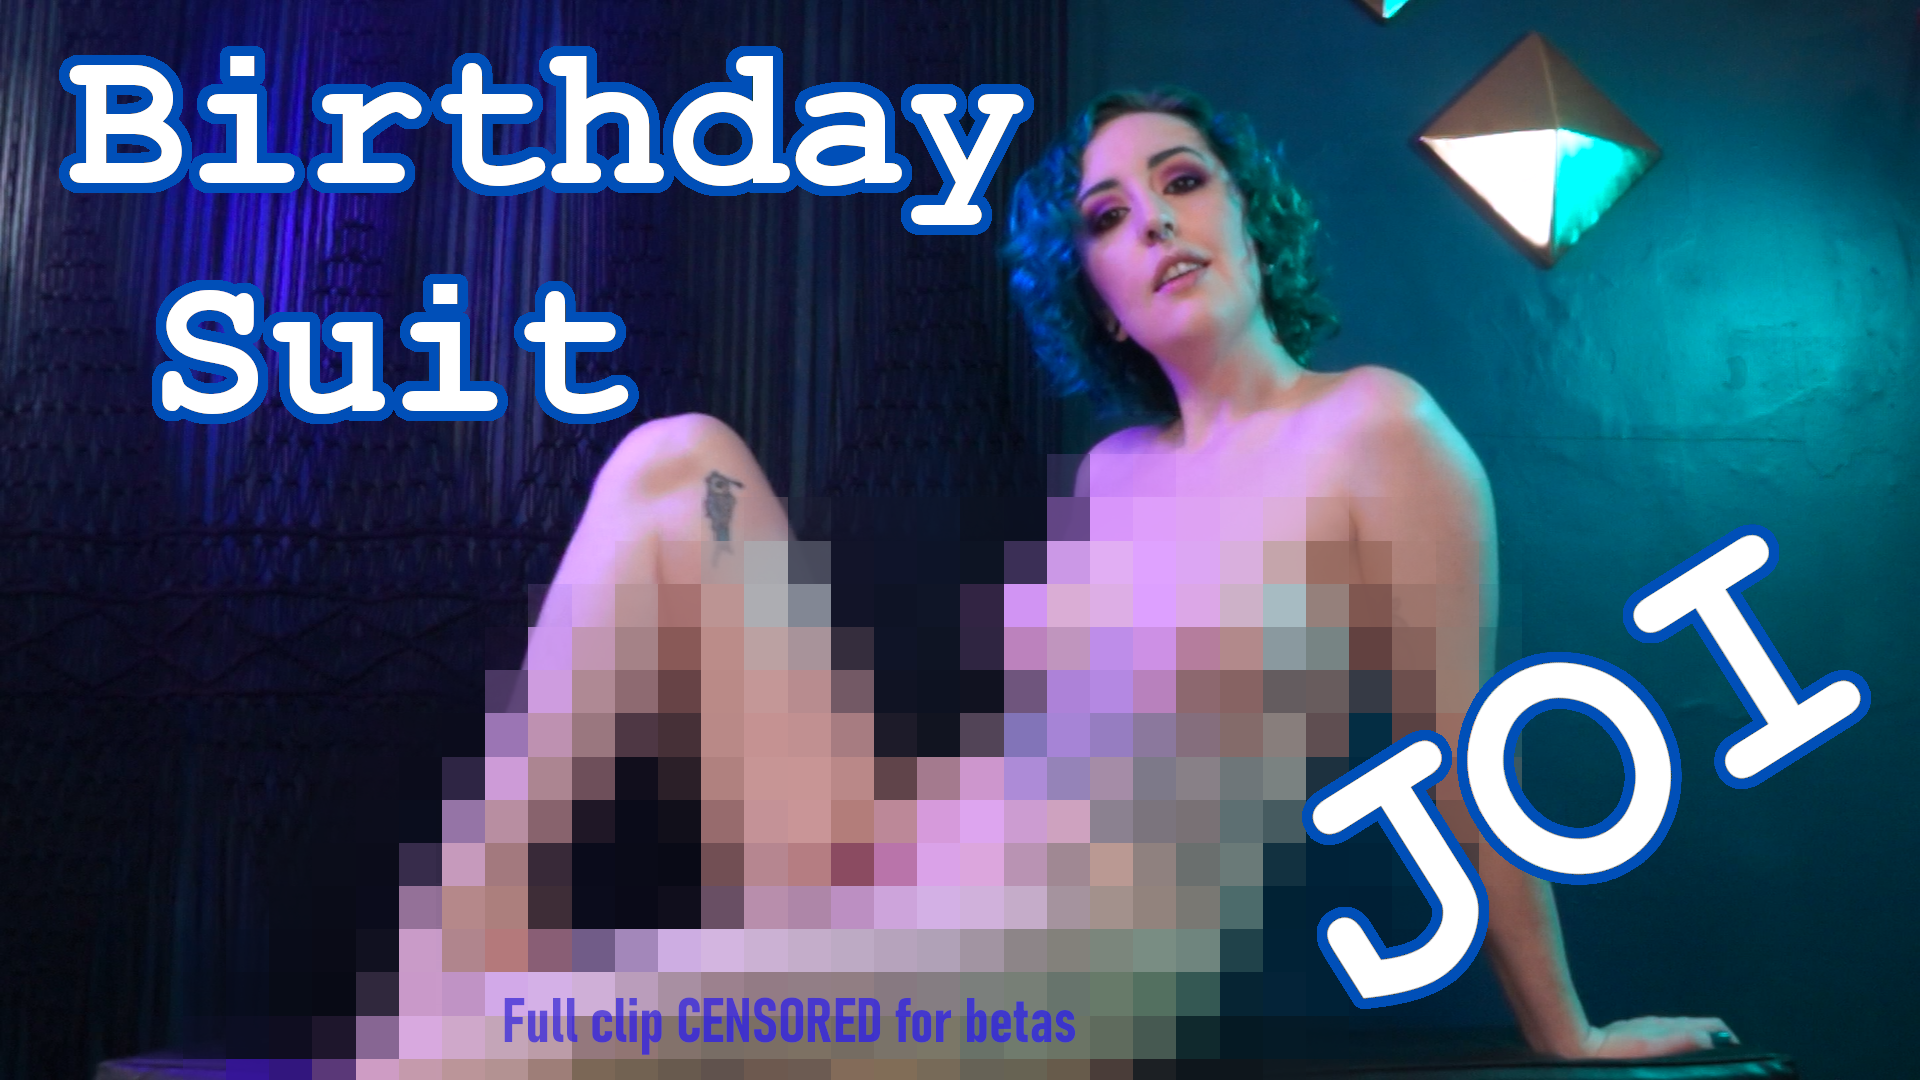 This is a snapshot from the femdom findom JOI clip, Birthday Suit JOI - Beta-Safe/Censored. Femdom Findom Goddess Miss Faith Rae sits on a bench with one foot up, fully nude, ready for you to worship her. Her naked Goddess body is censored with a pixelated filter. Her hair is short, curly, and turquoise. You are not allowed to see her tits, ass, or feet. She gazes at you, knowing you are going to give everything you have in order to gain her permission to cum. Text overlay says, Birthday Suit JOI. Full Clip CENSORED For Betas.